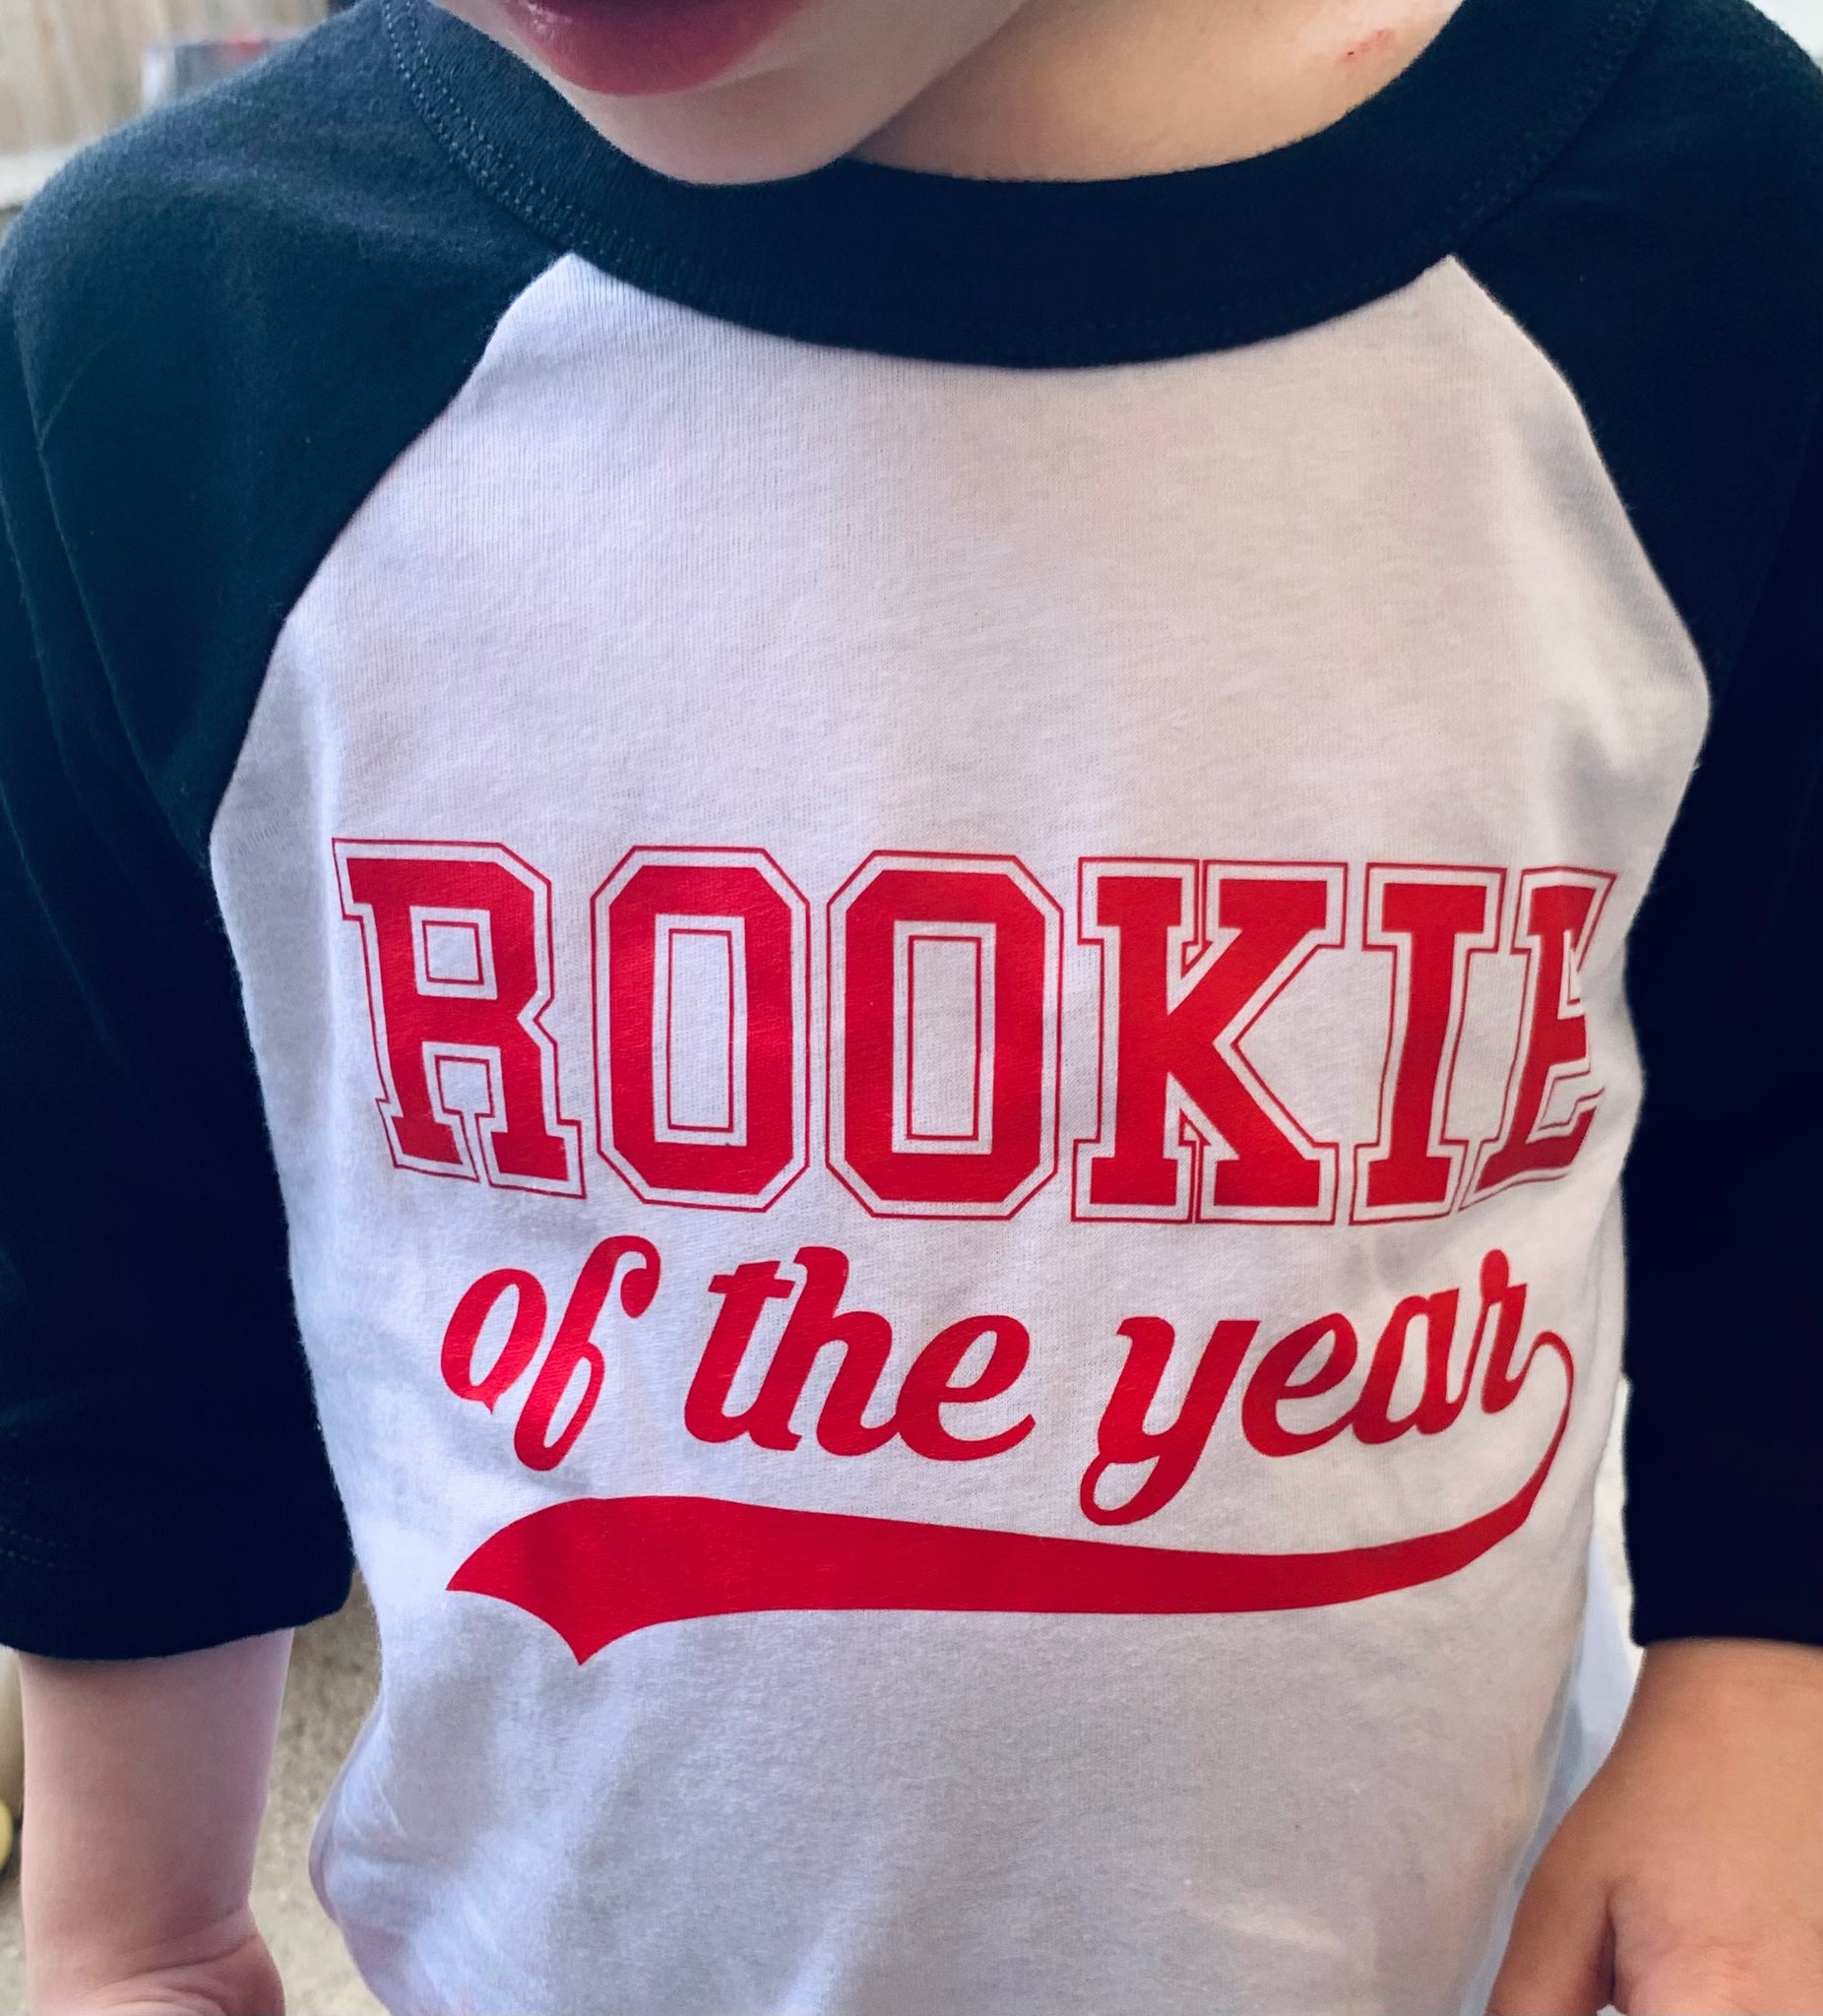 Rookie of the year 1st birthday shirt